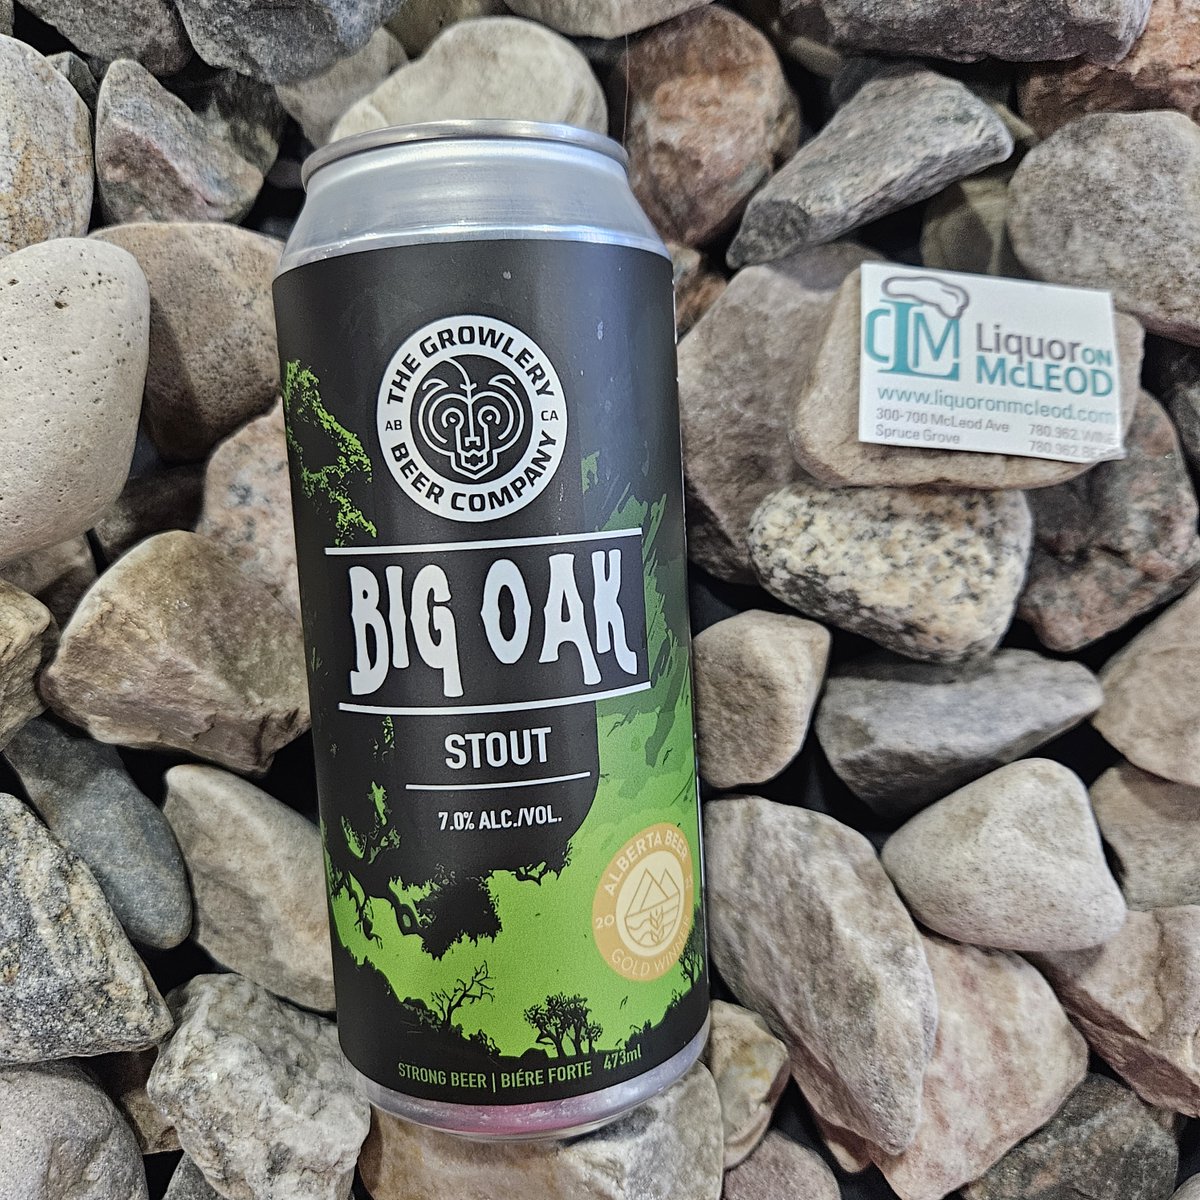 Big Oak Stout from @growlerybeer is aged on oak spirals, imparting rich and complex flavors of chocolate and oak to the brew. It is perfect for a cold winter day! #yegbeer #growlerybrewing #sprucegrove #stonyplain #liquronmcleod